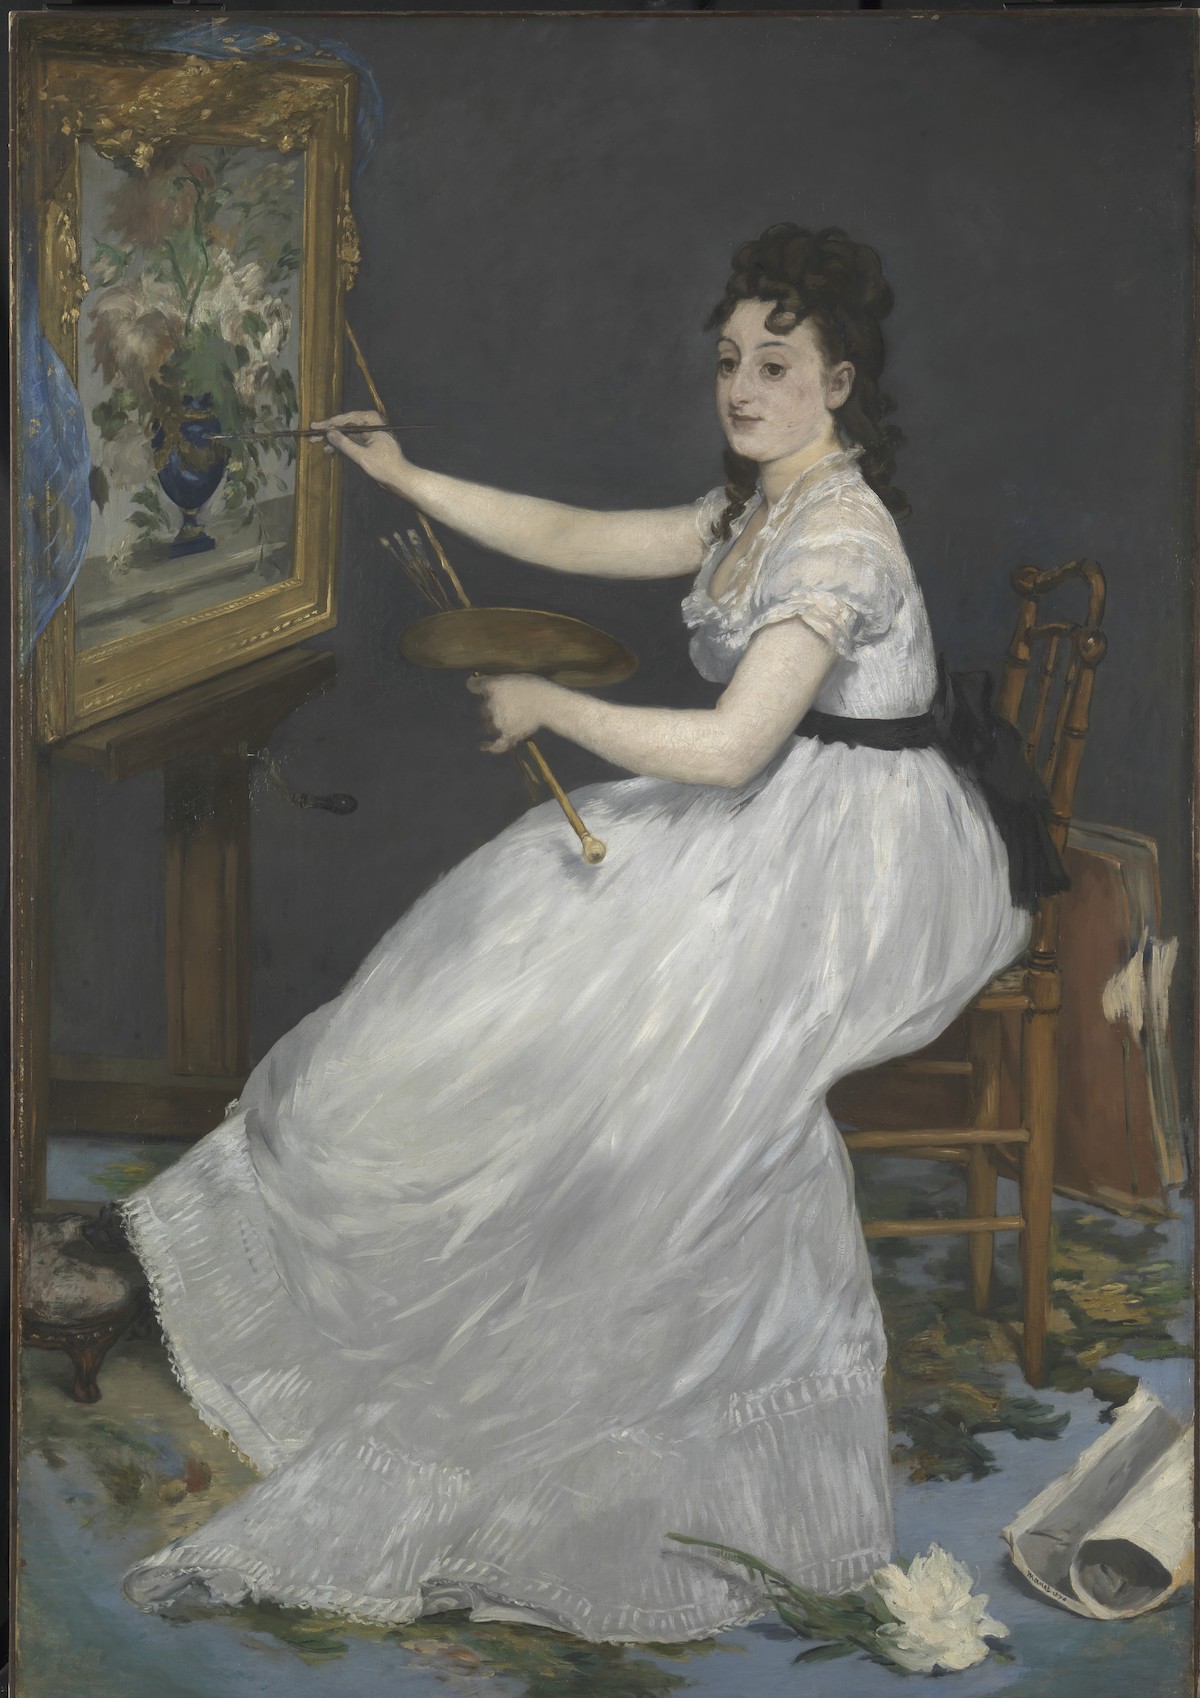 A brushy painting of a seated white woman painting a still life of flowers in a vase. Her flowing white dress tumbles across her legs. At her feet is a sole white rose.